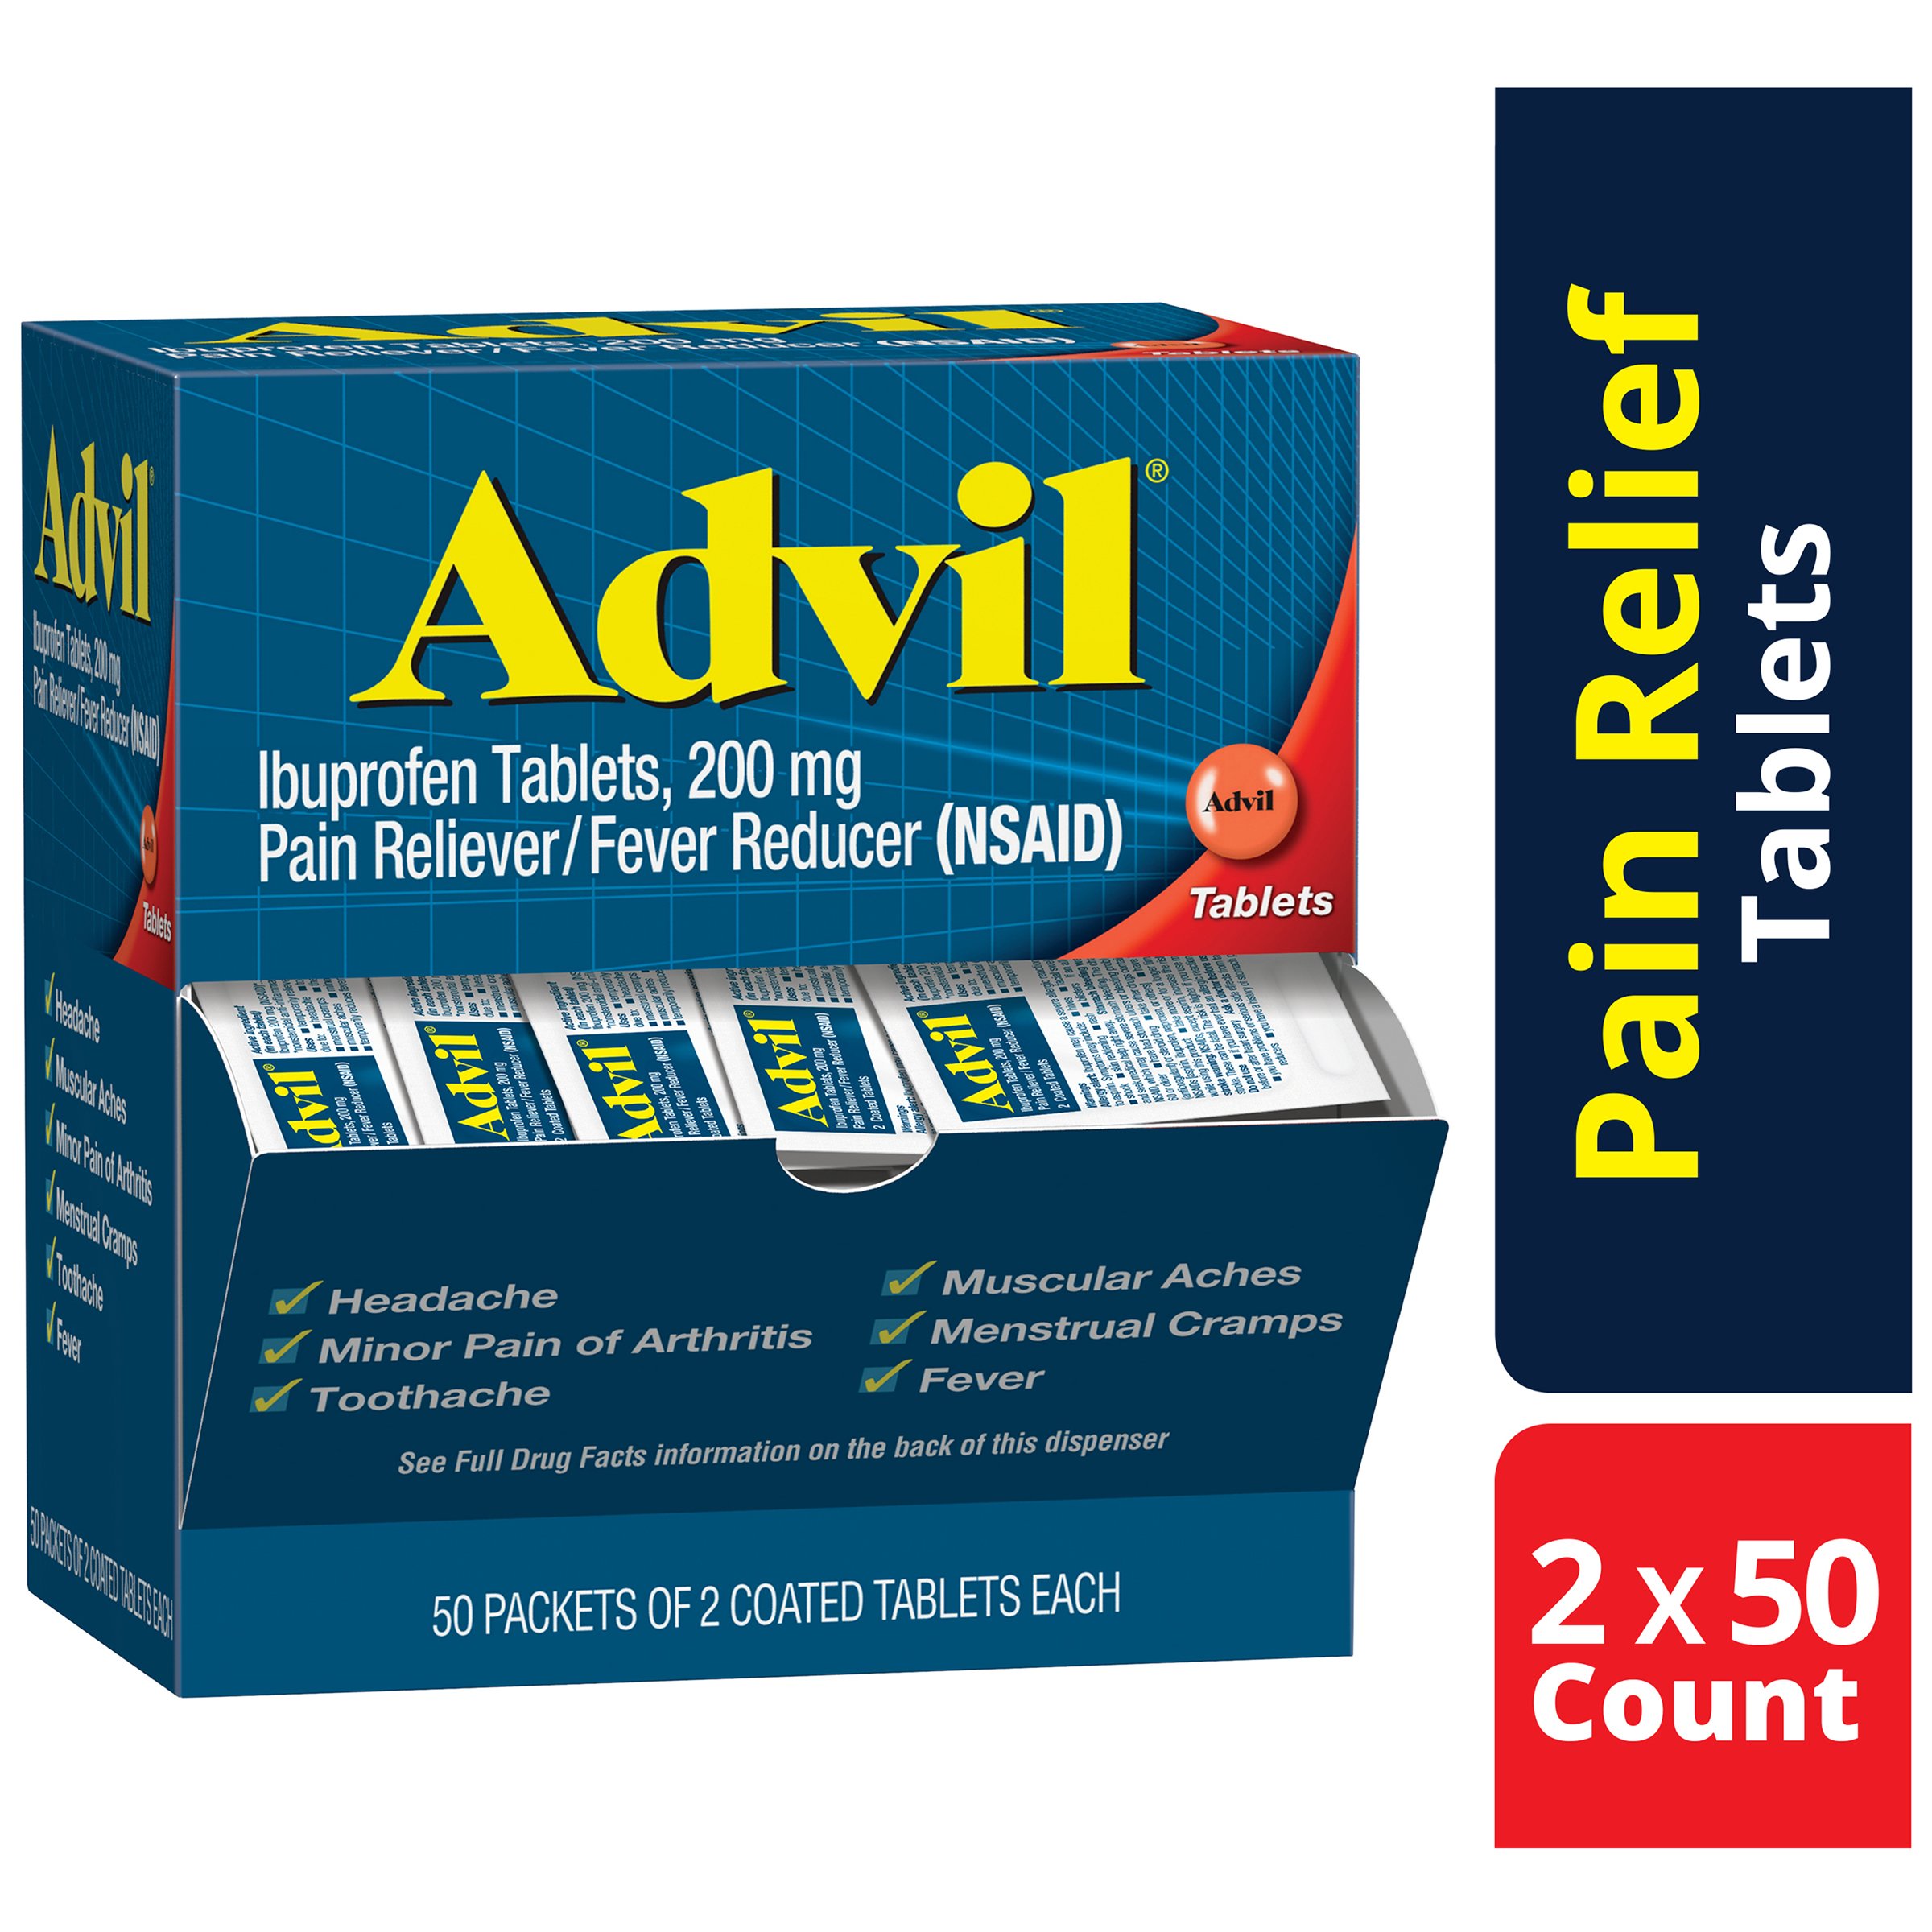 Advil Pain Reliever / Fever Reducer Coated Tablet Refill 2 by 50 Ct ...